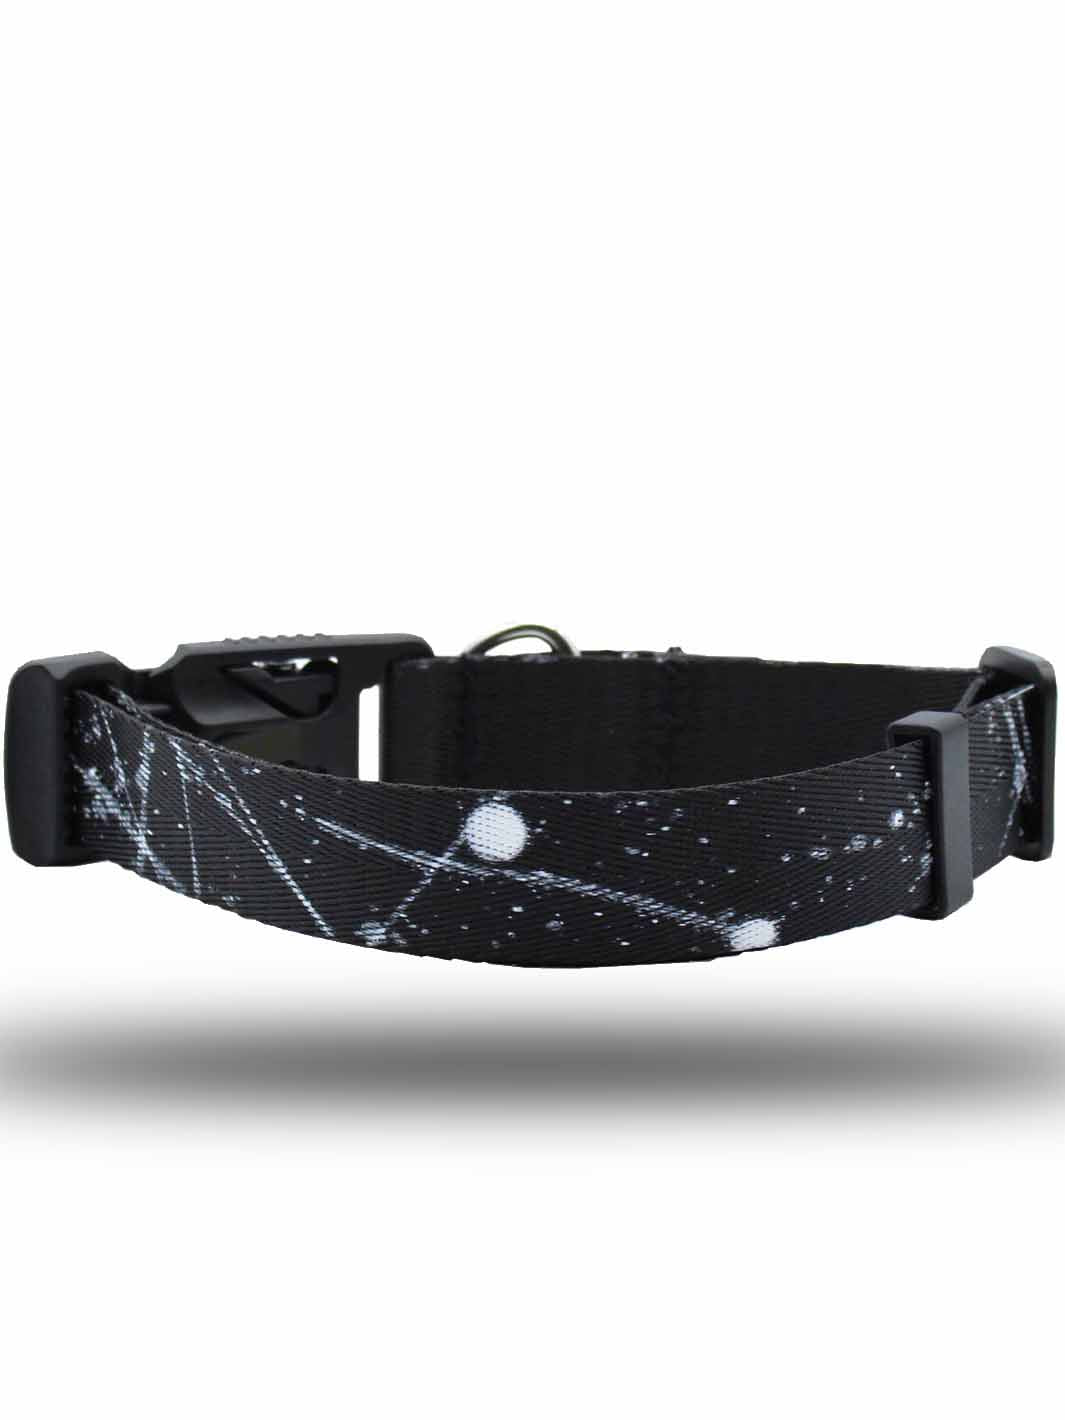 The backside of a dog collar with a black and white printed pattern by MAGNUS Canis.